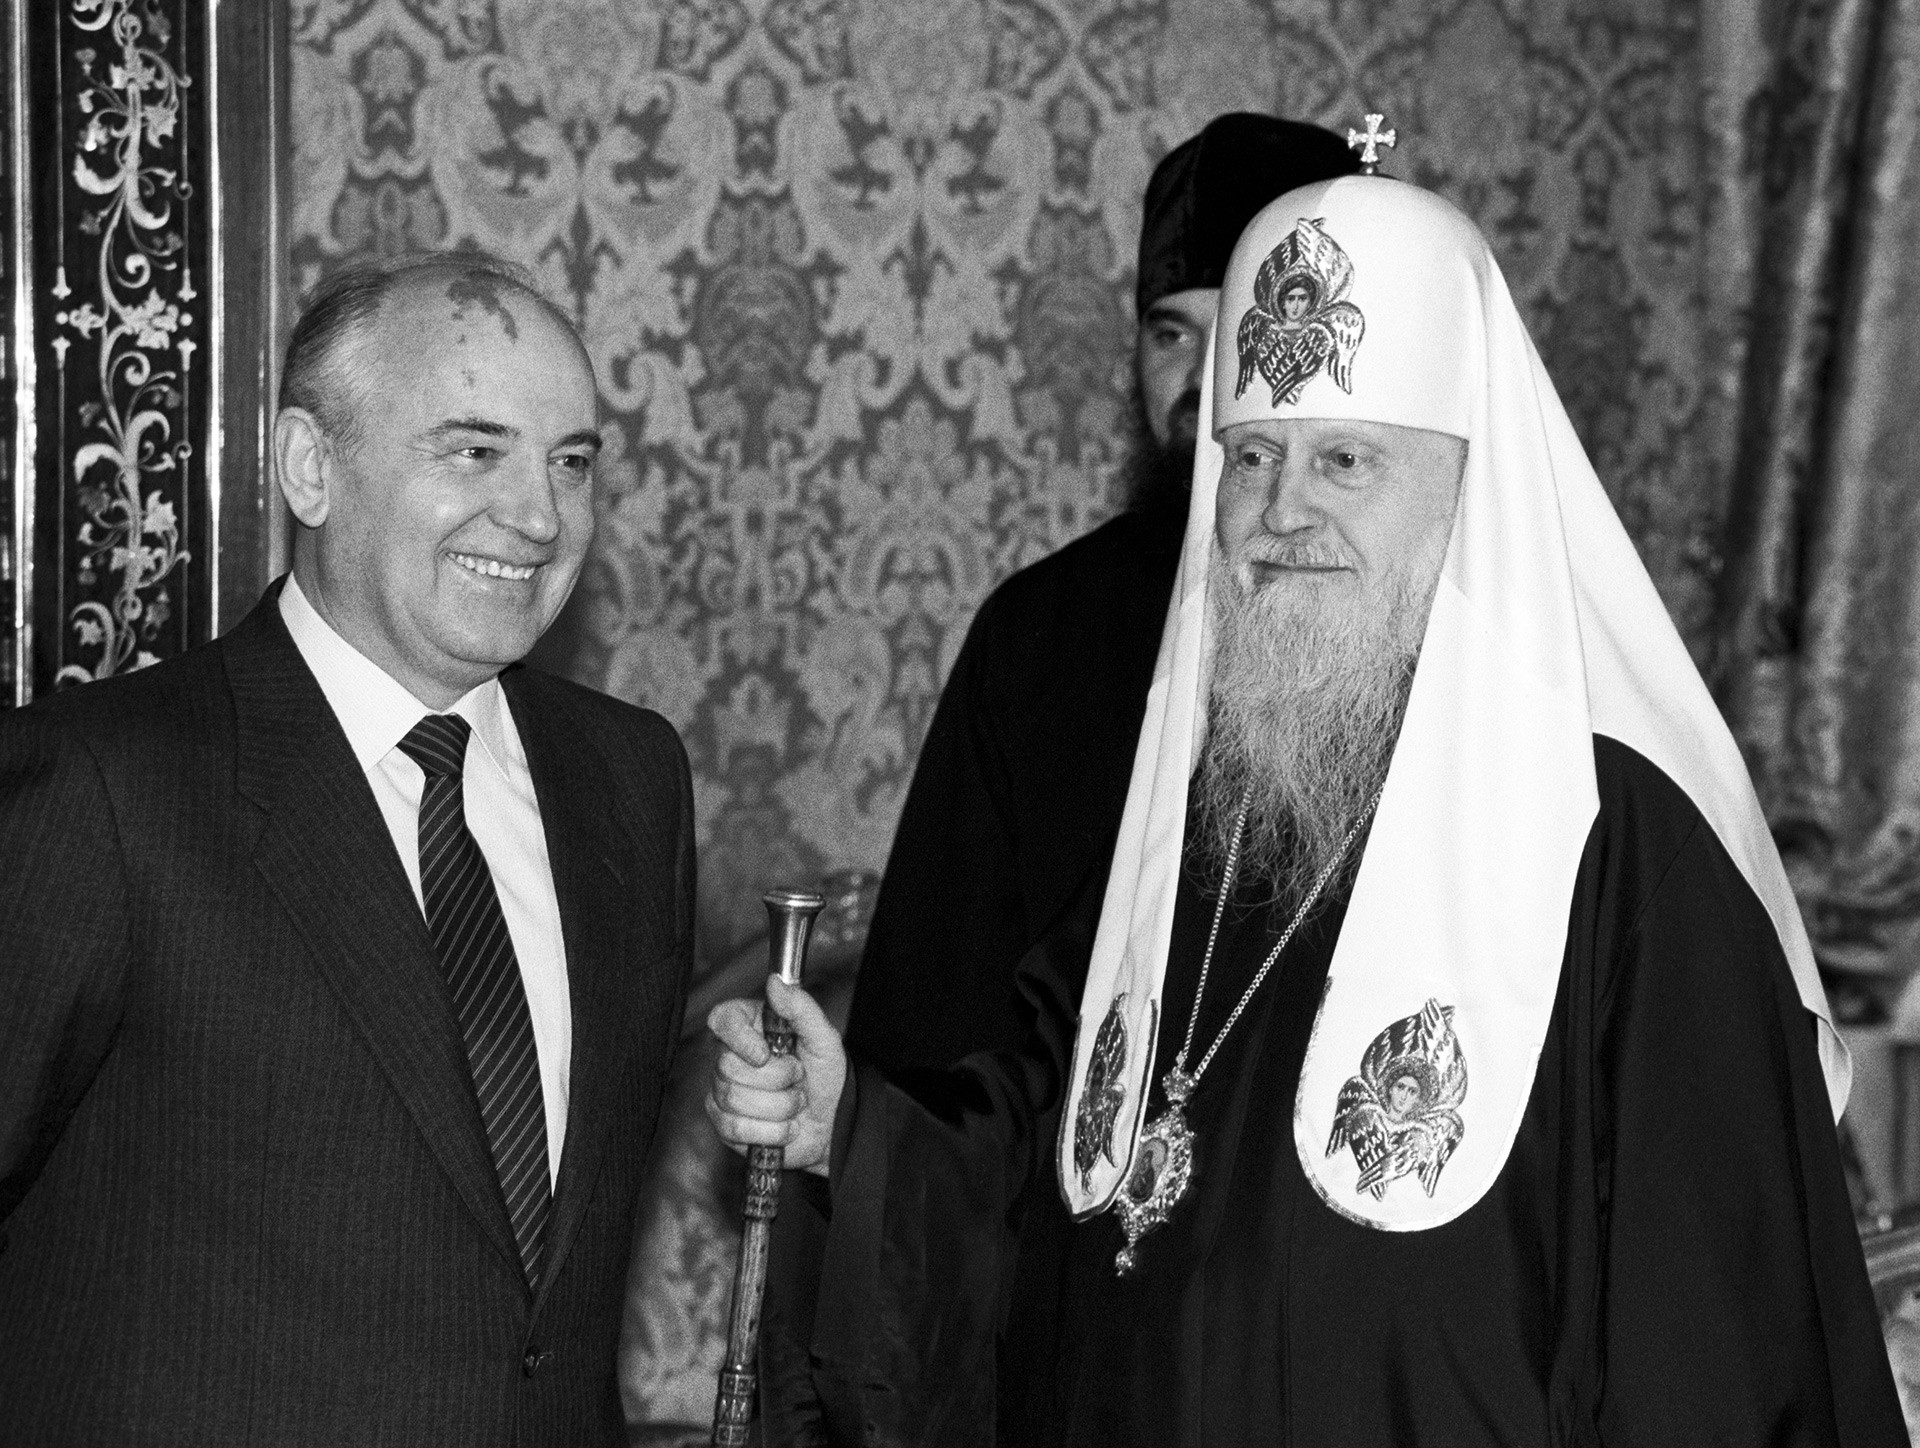 Mikhail Gorbachev and Patriarch Pimen at the meeting.